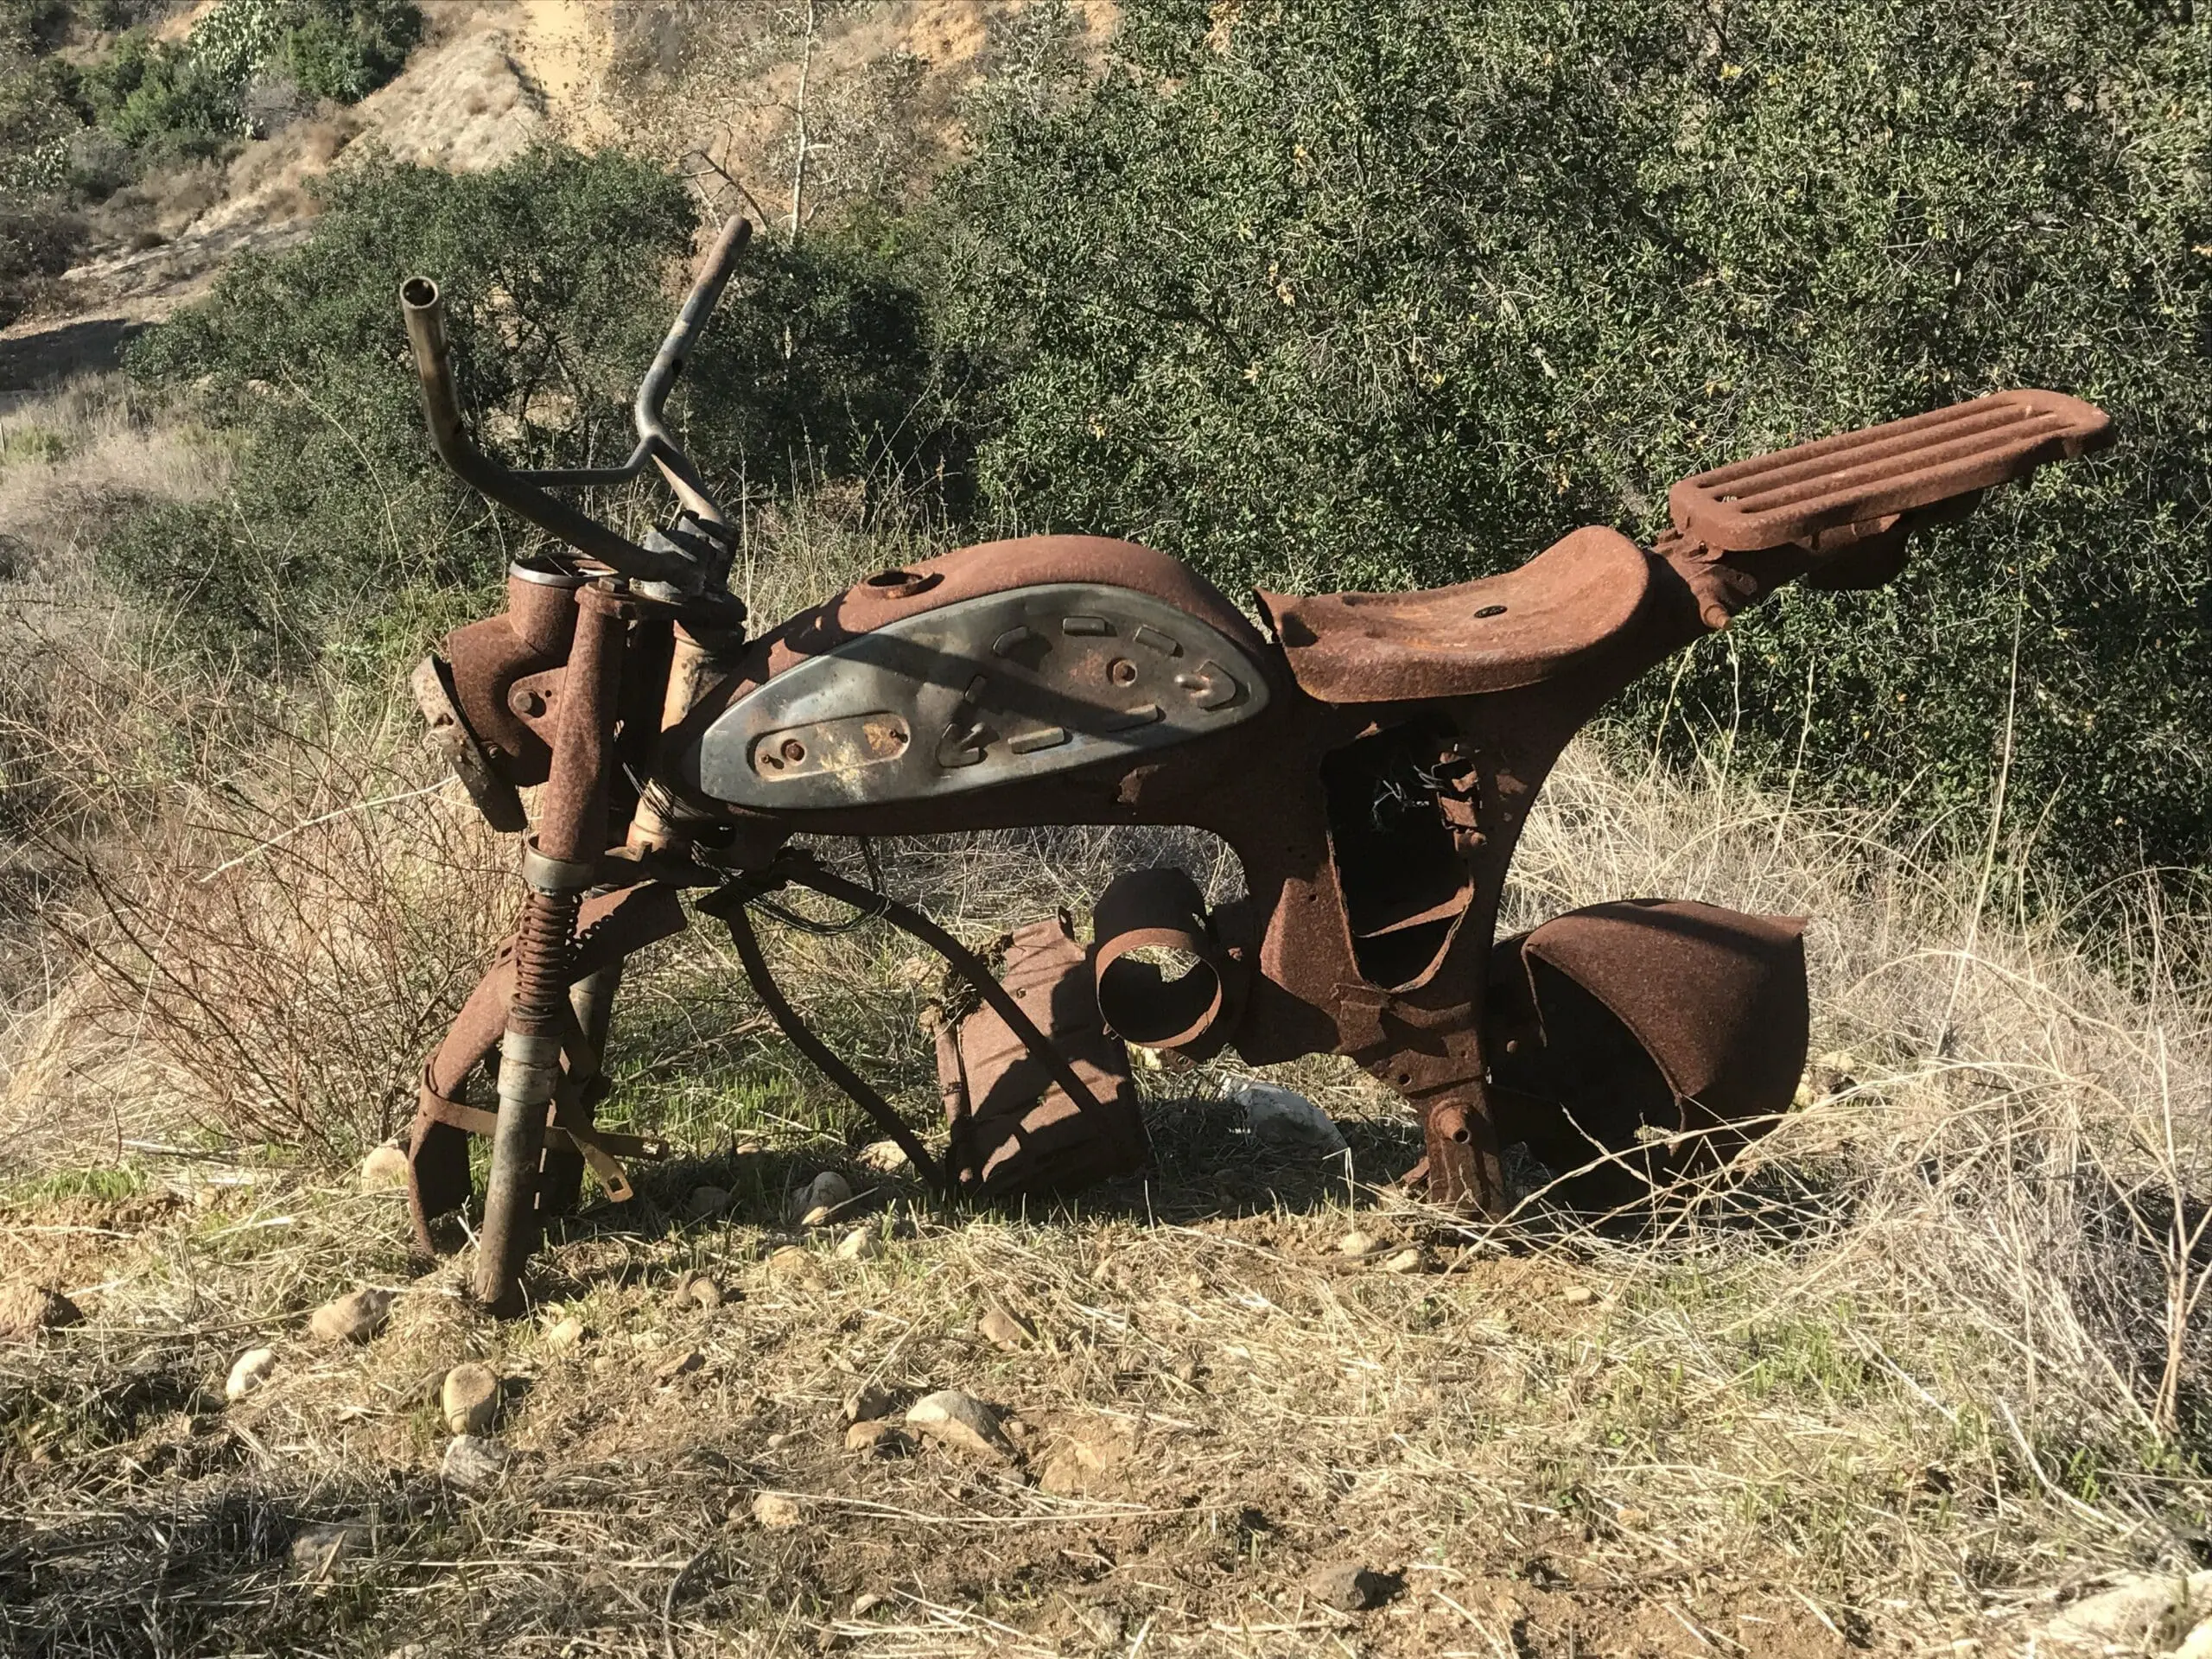 Turnbull Canyon rusted motorcycle